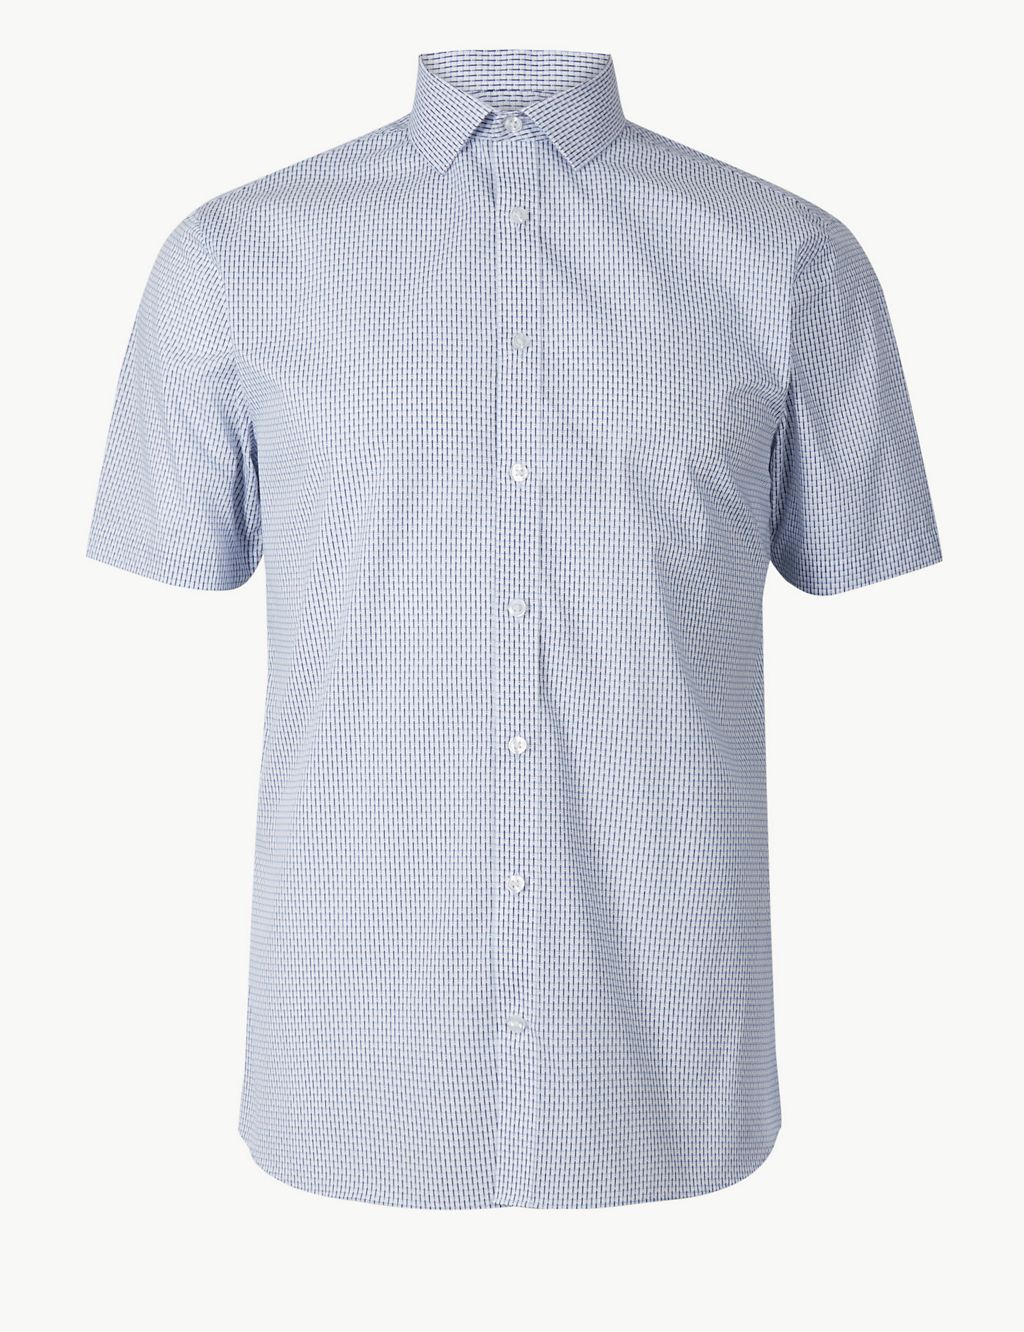 Cotton Blend Slim Fit Printed Shirt 1 of 4